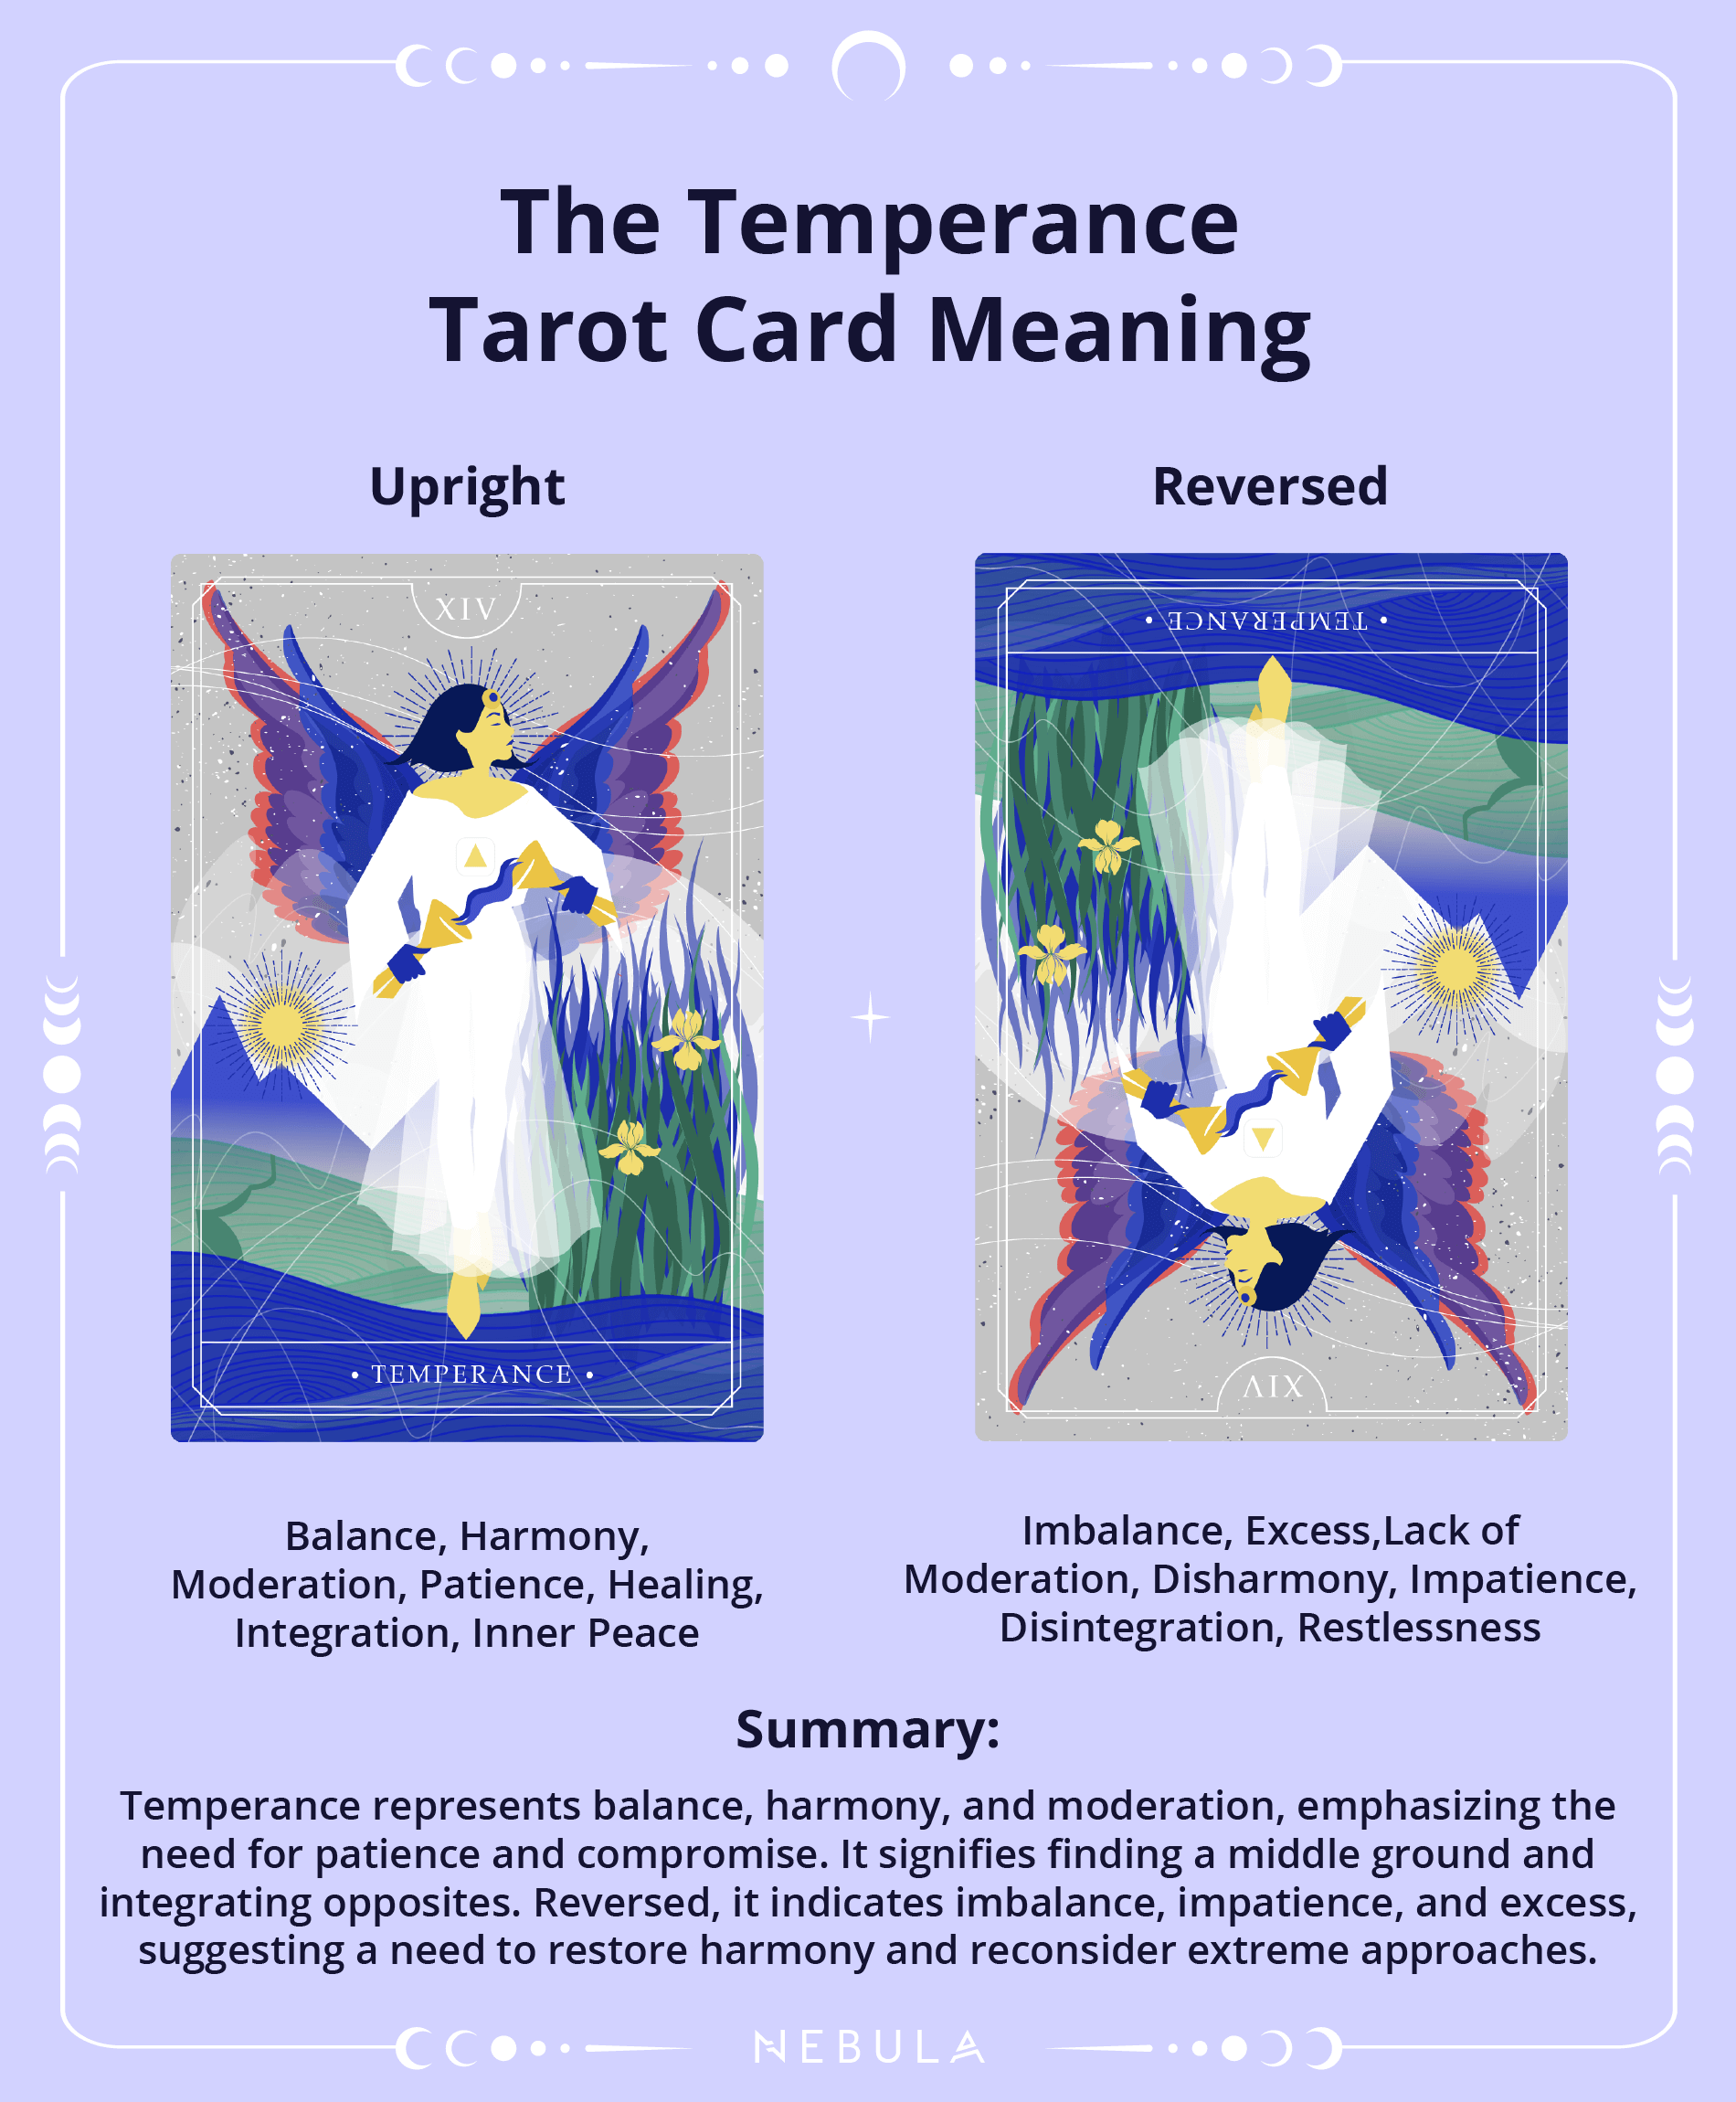 The Temperance Tarot Card Meaning